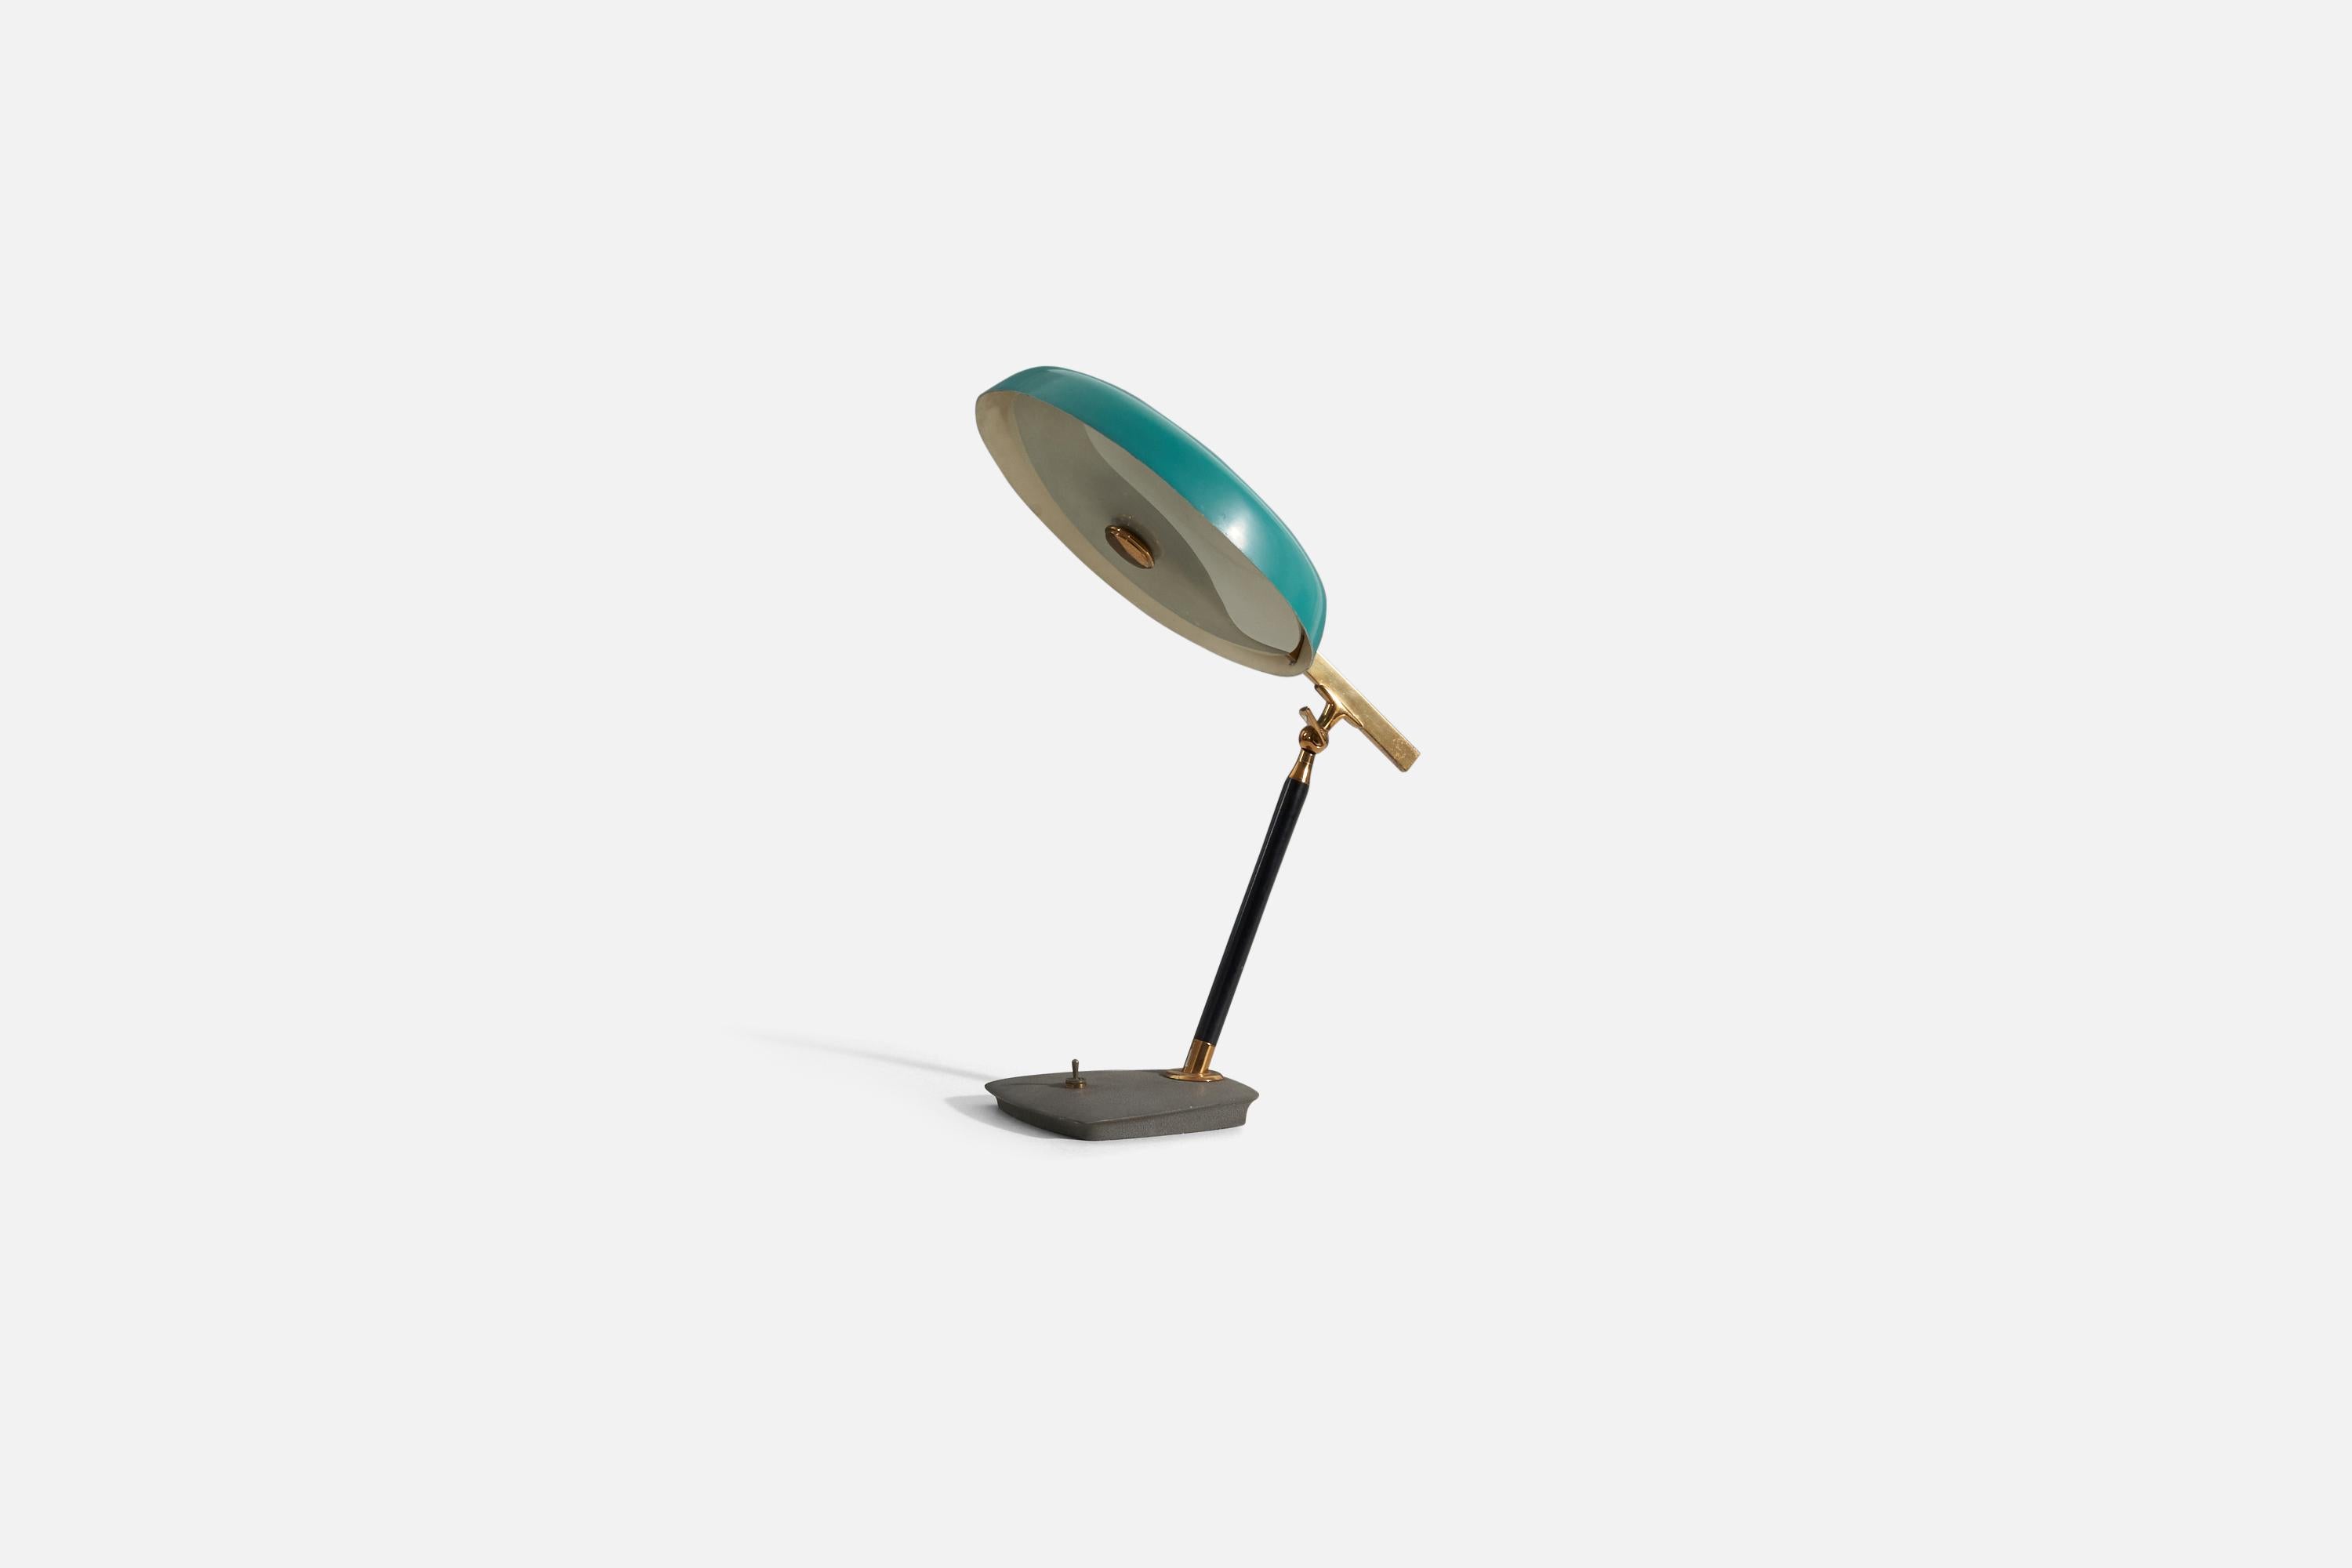 A blue-green lacquered metal, brass, and glass desk light / table lamp, designed by Oscar Torlasco, produced by Lumen Milano, Italy, 1950s. All original unrestored condition.
 
Measurements listed are as photographed in first image.